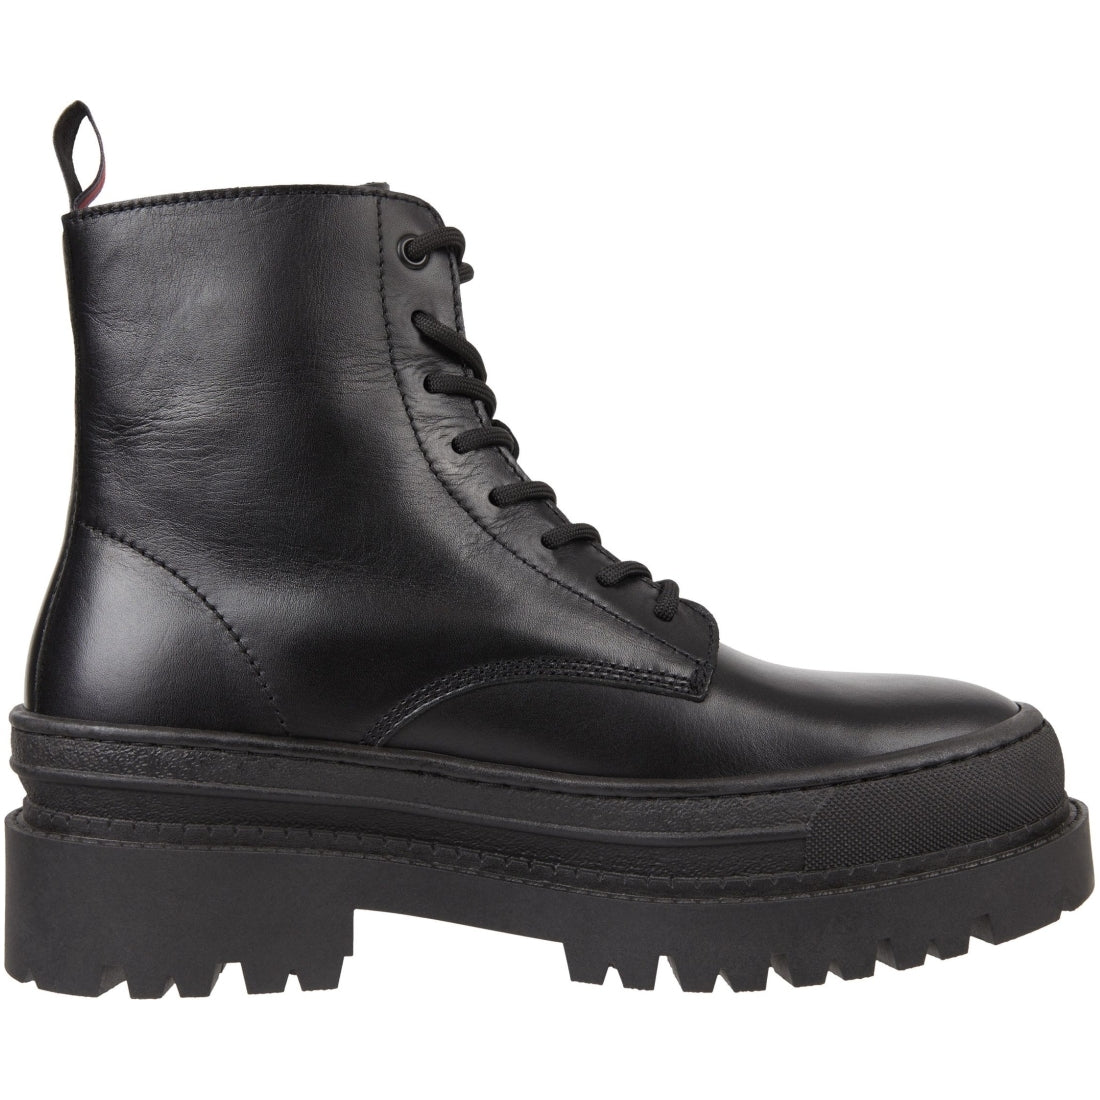 Tommy Jeans mens black foxing lace up booties | Vilbury London